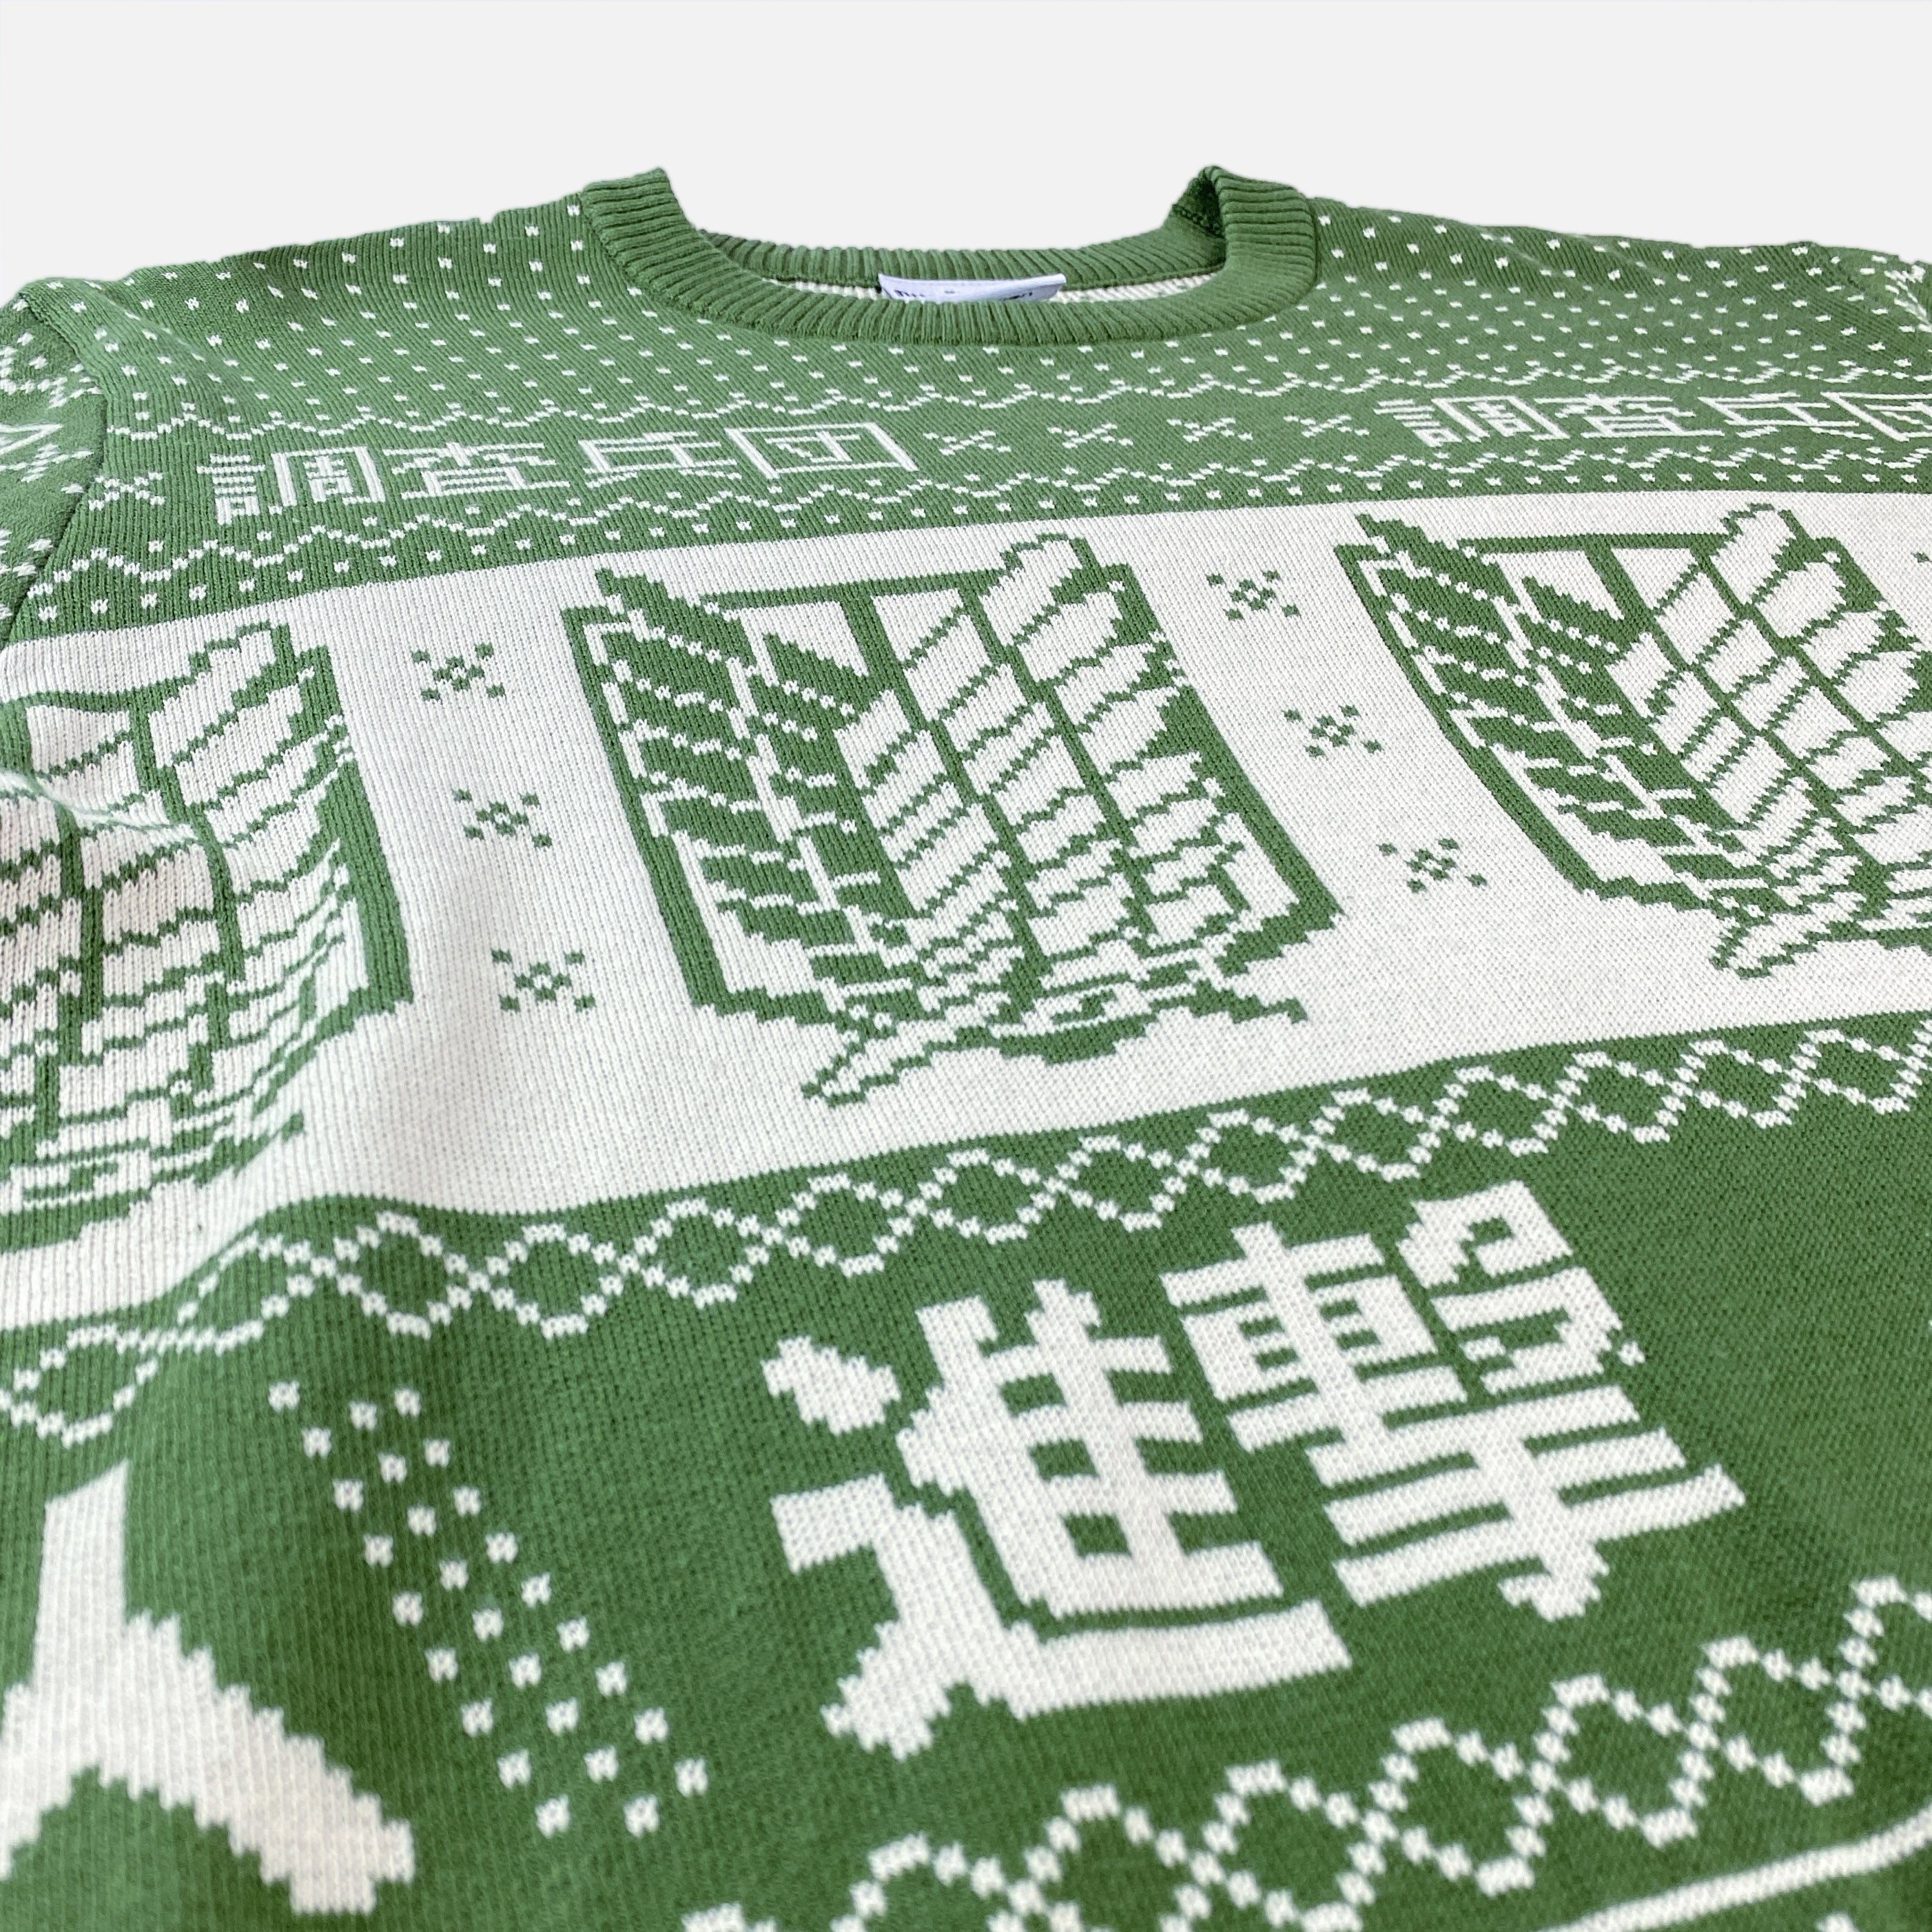 Attack on Titan - Scout Regiment Holiday Sweater - Crunchyroll Exclusive! image count 1